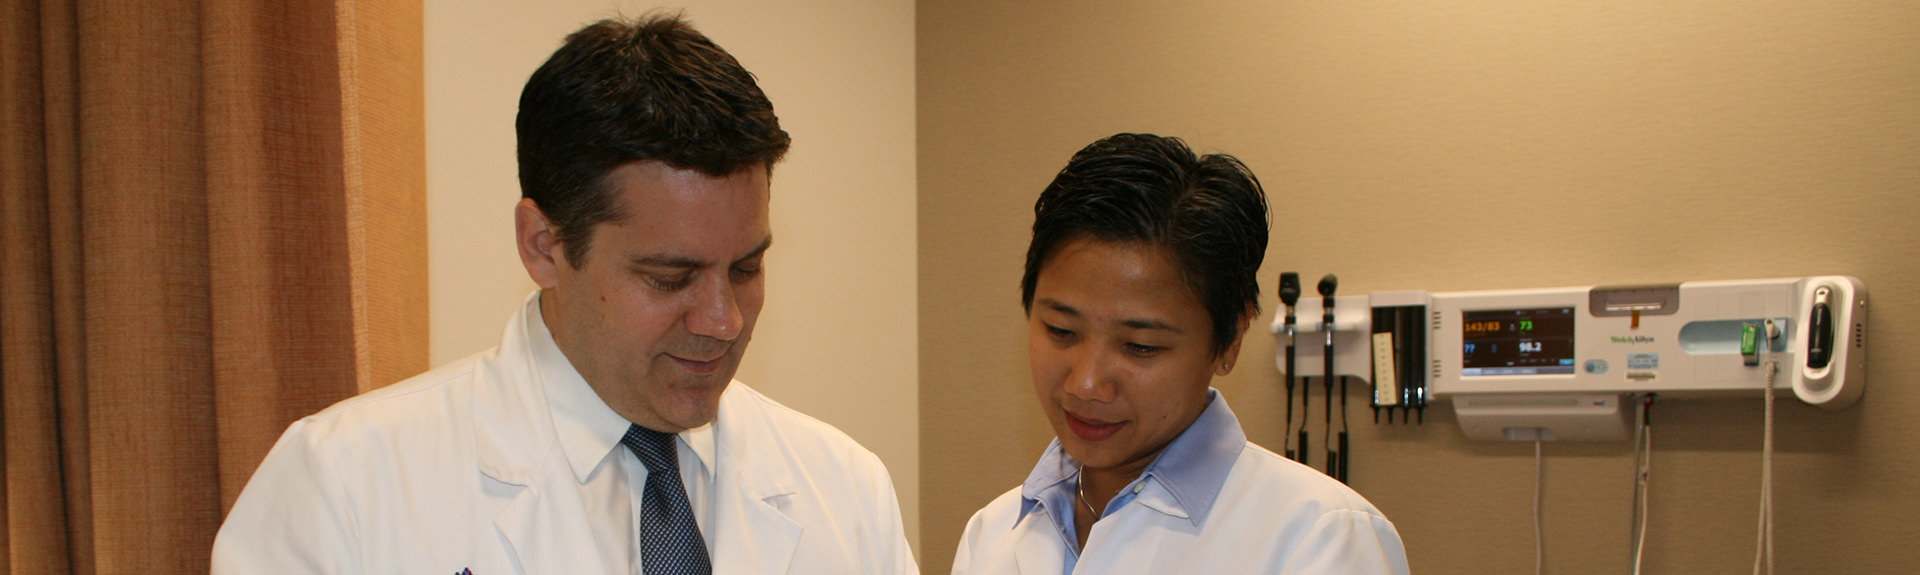 a male and a female physicians in an exam room